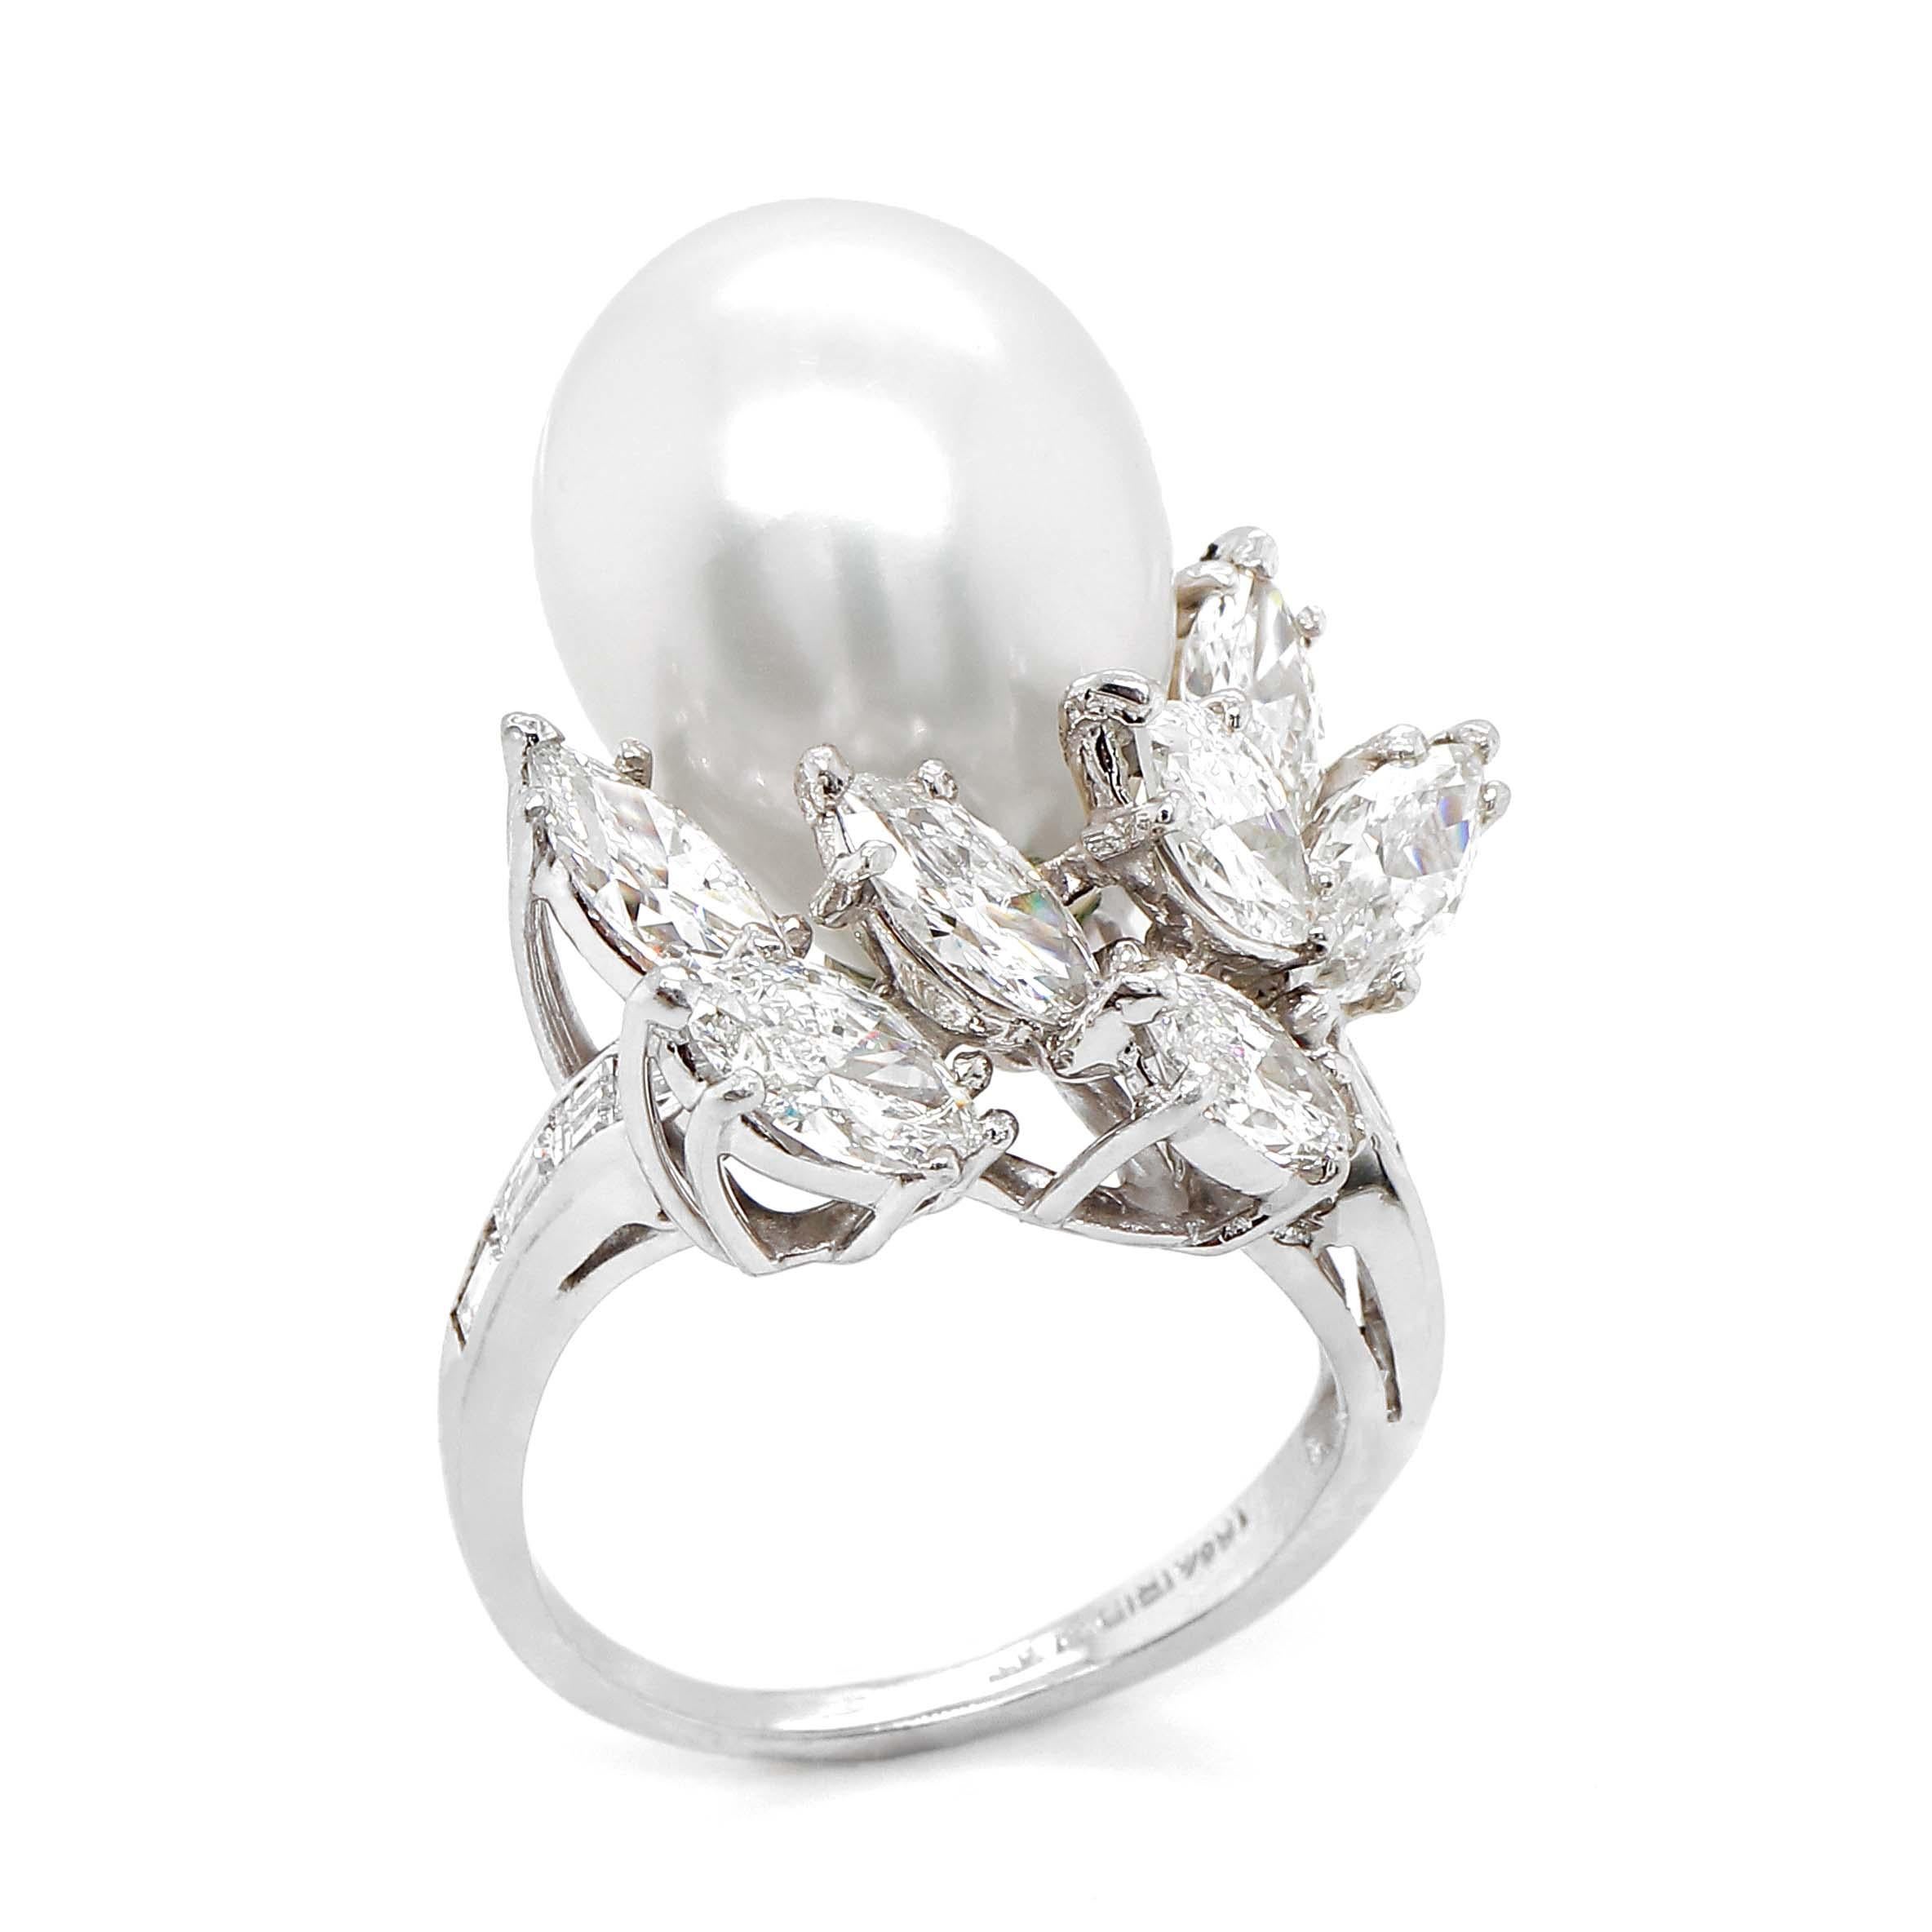 Ring containing one South Sea Pearl measuring 17x13mm, 7 marquise Diamonds of about 2.64 carats 8 baguette Diamonds of about 0.38 carats with a clarity of VS and color G. All stones are set in a platinum ring. The total weight of the ring is